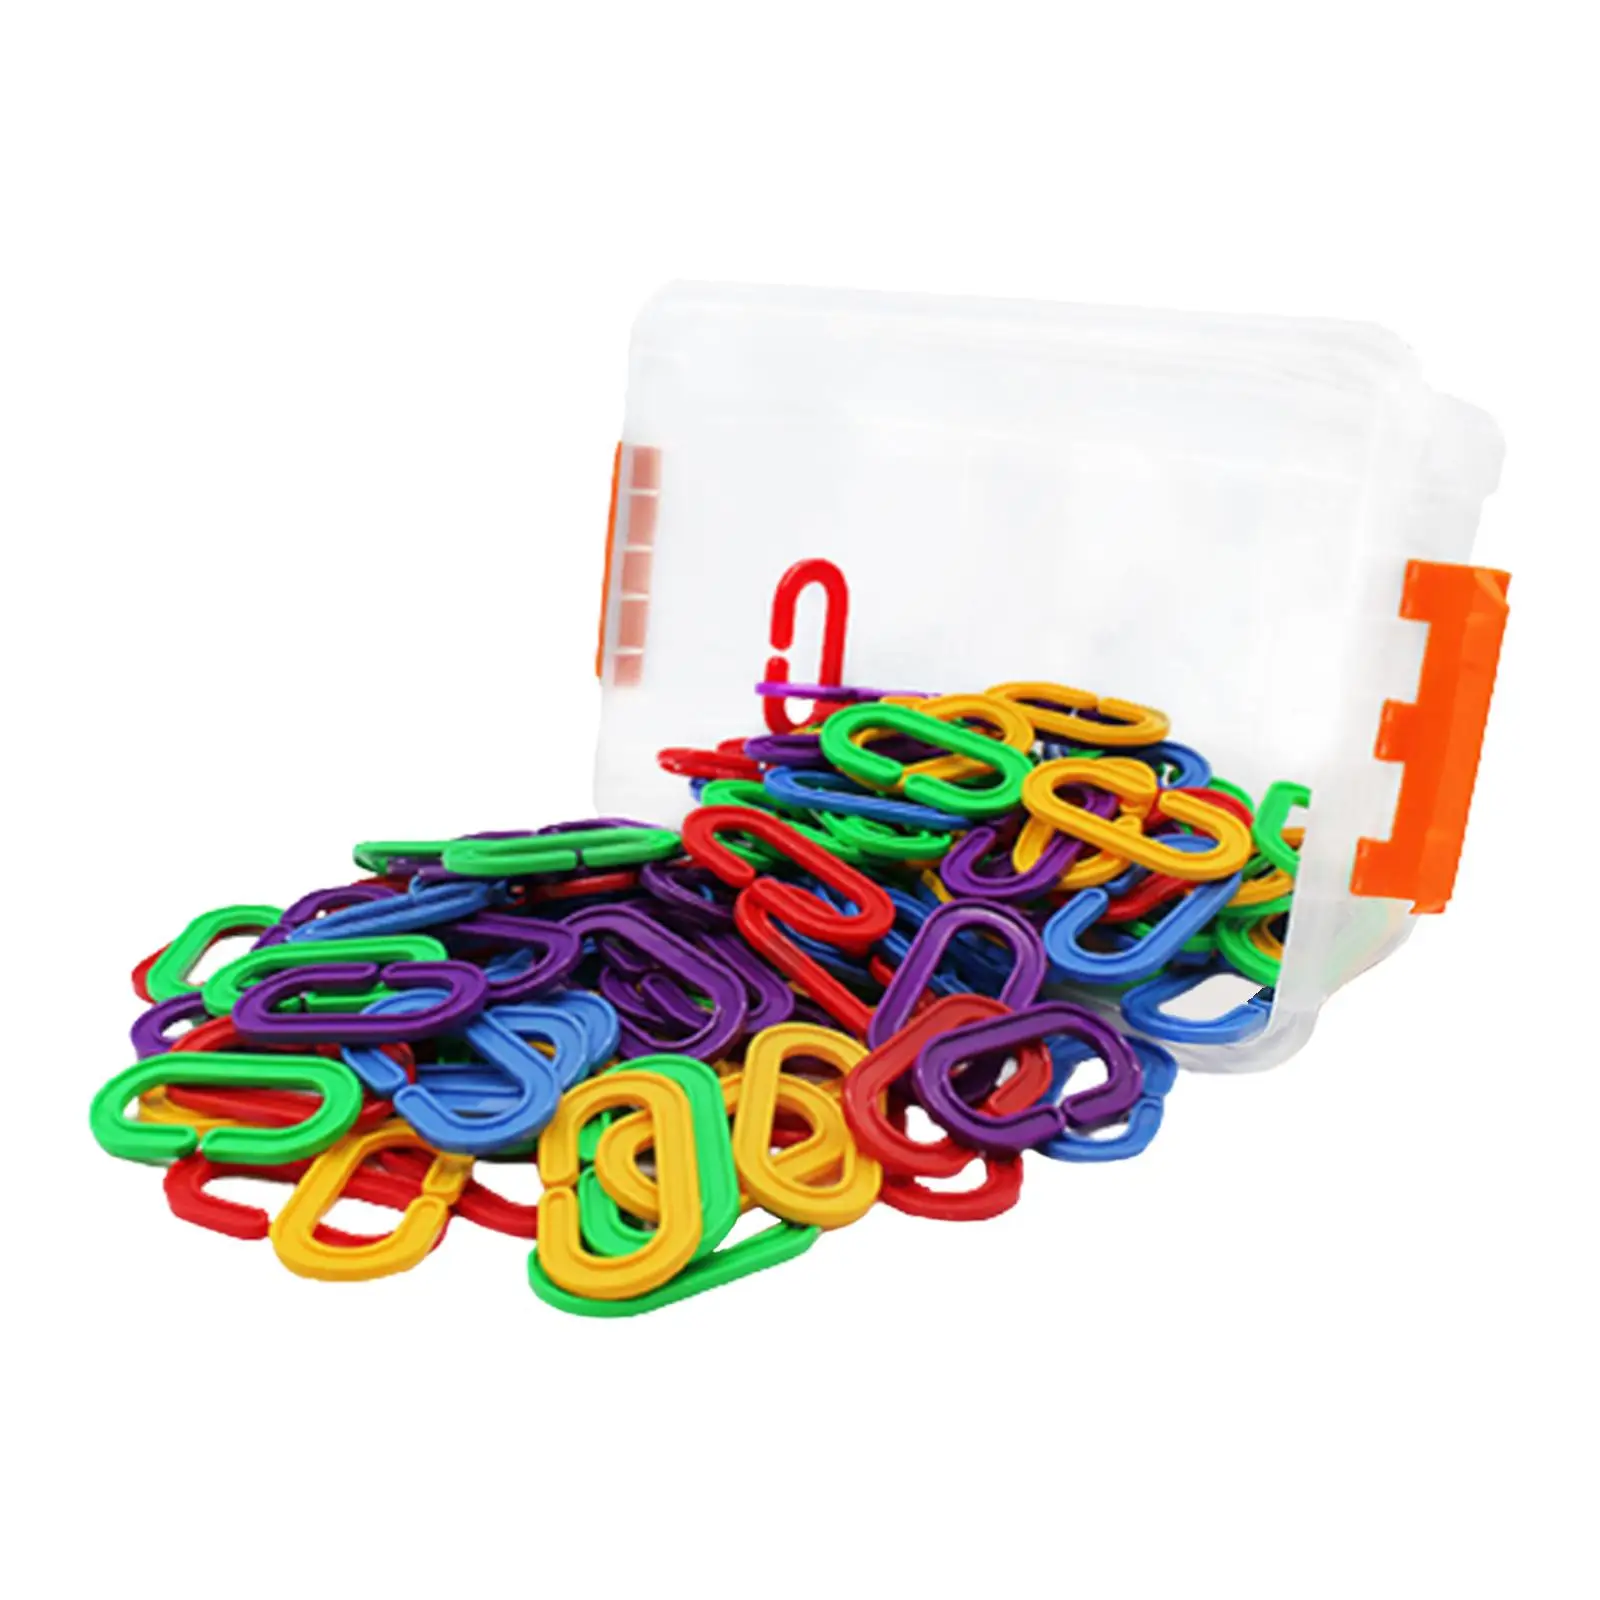 150 Pieces C Hook Counting and Sorting Educational Fine Motor Bird Swing Chain Color Recognition Chain Links for Playroom